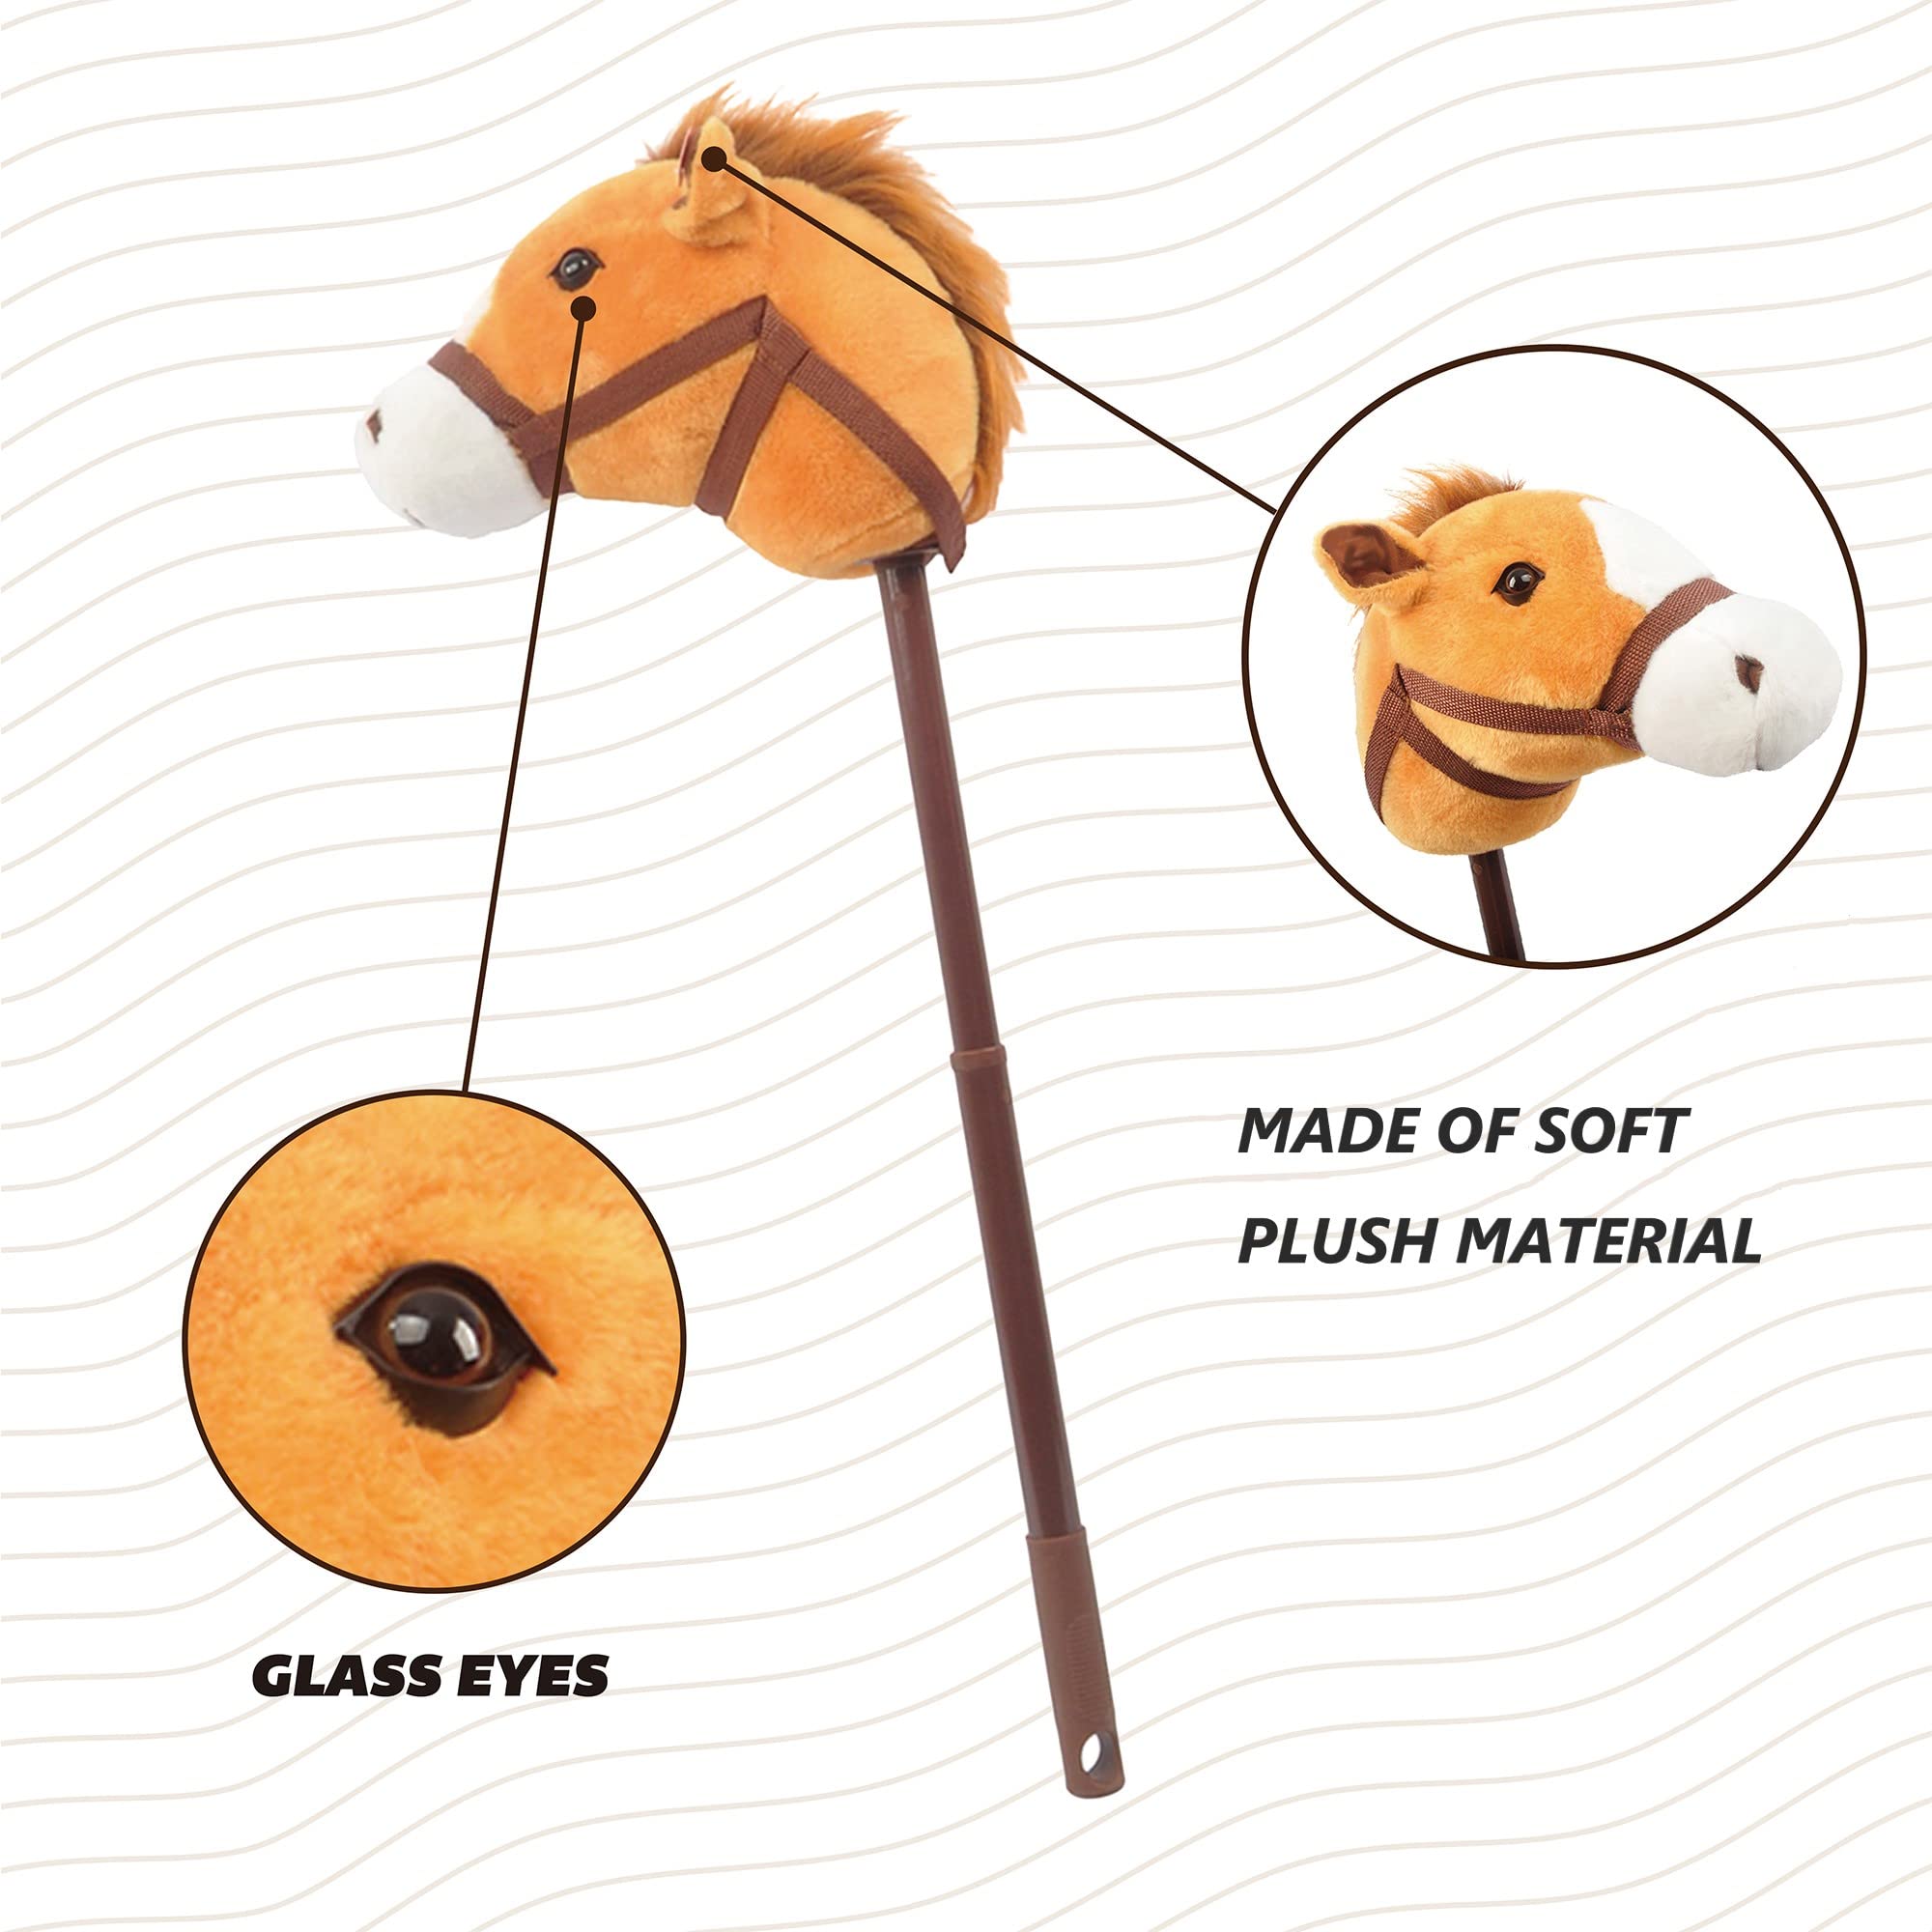 Linzy Plush Hobby Horse Stick Toy, Adjustable Telescopic Stick, Adjust to 3 Different Sizes, For Cowboy and Cowgirl of Different Ages, Light Brown